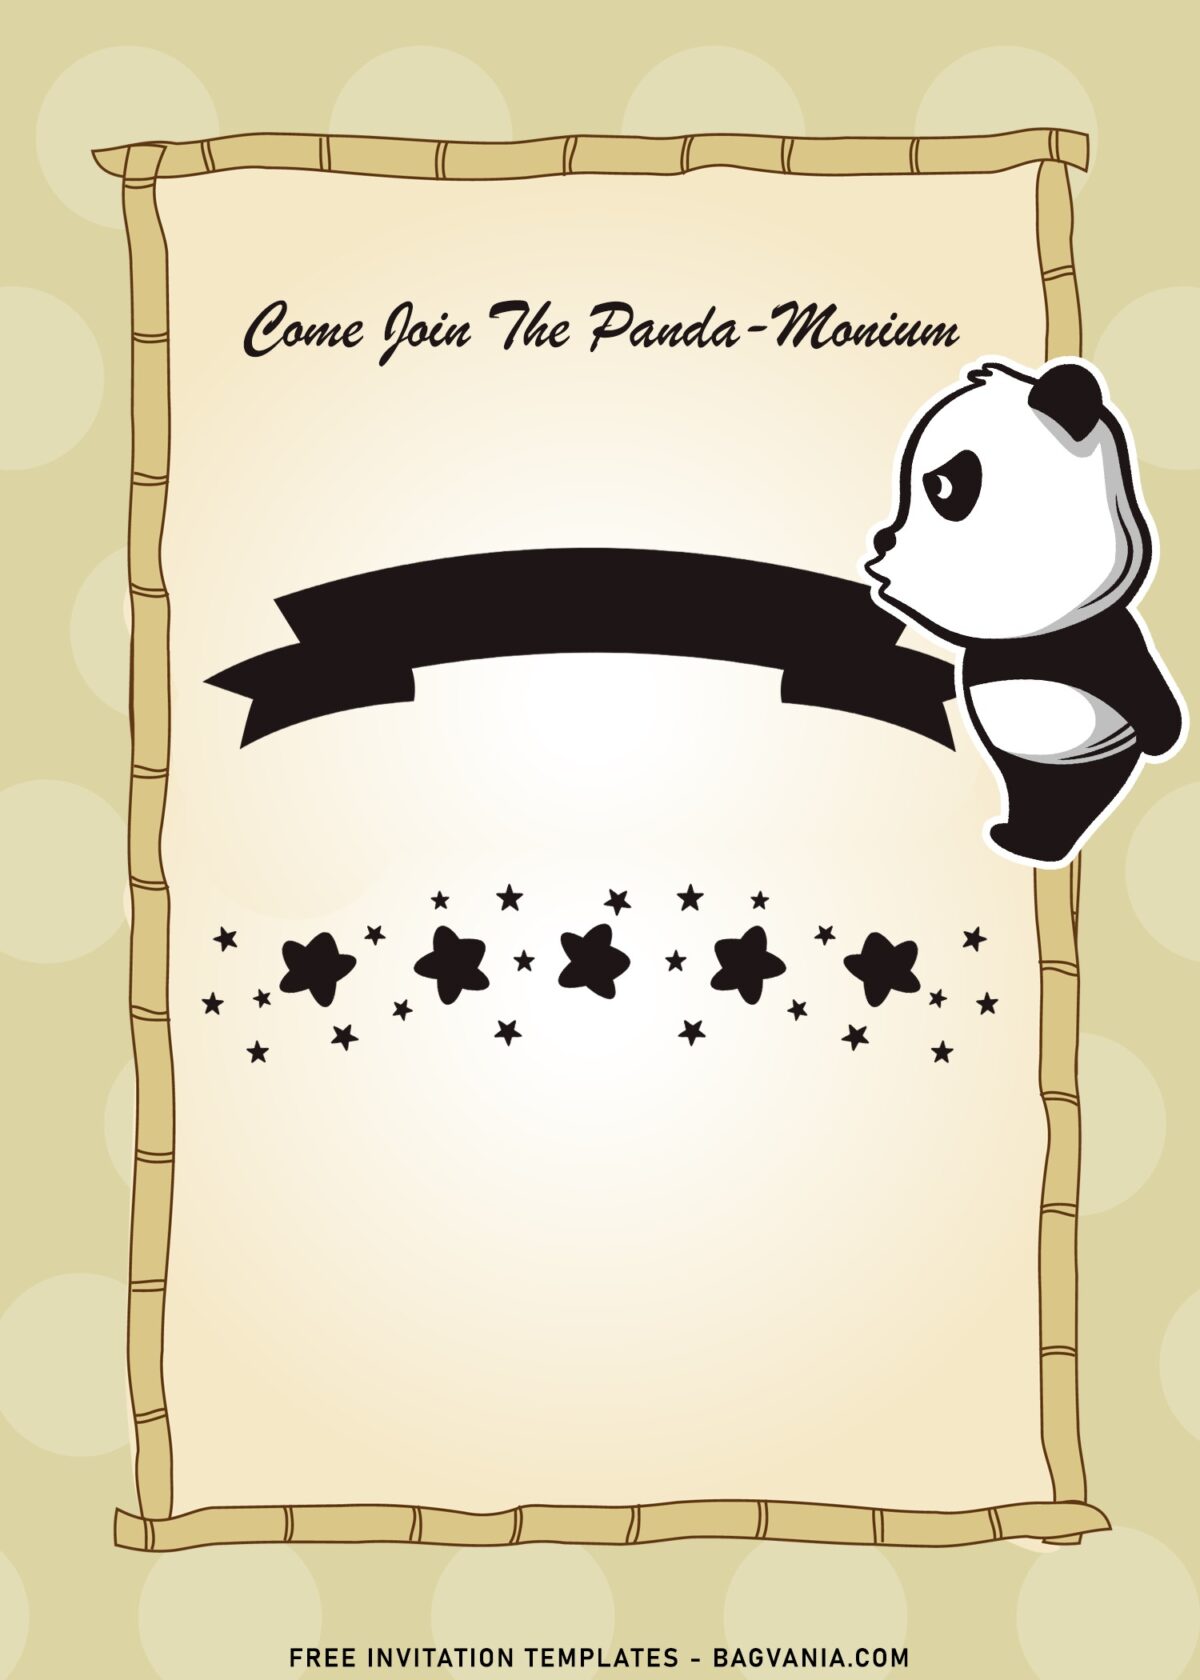 9+ Funny Panda Birthday Invitation Templates For Your Kid's Birthday with lovely cute stars